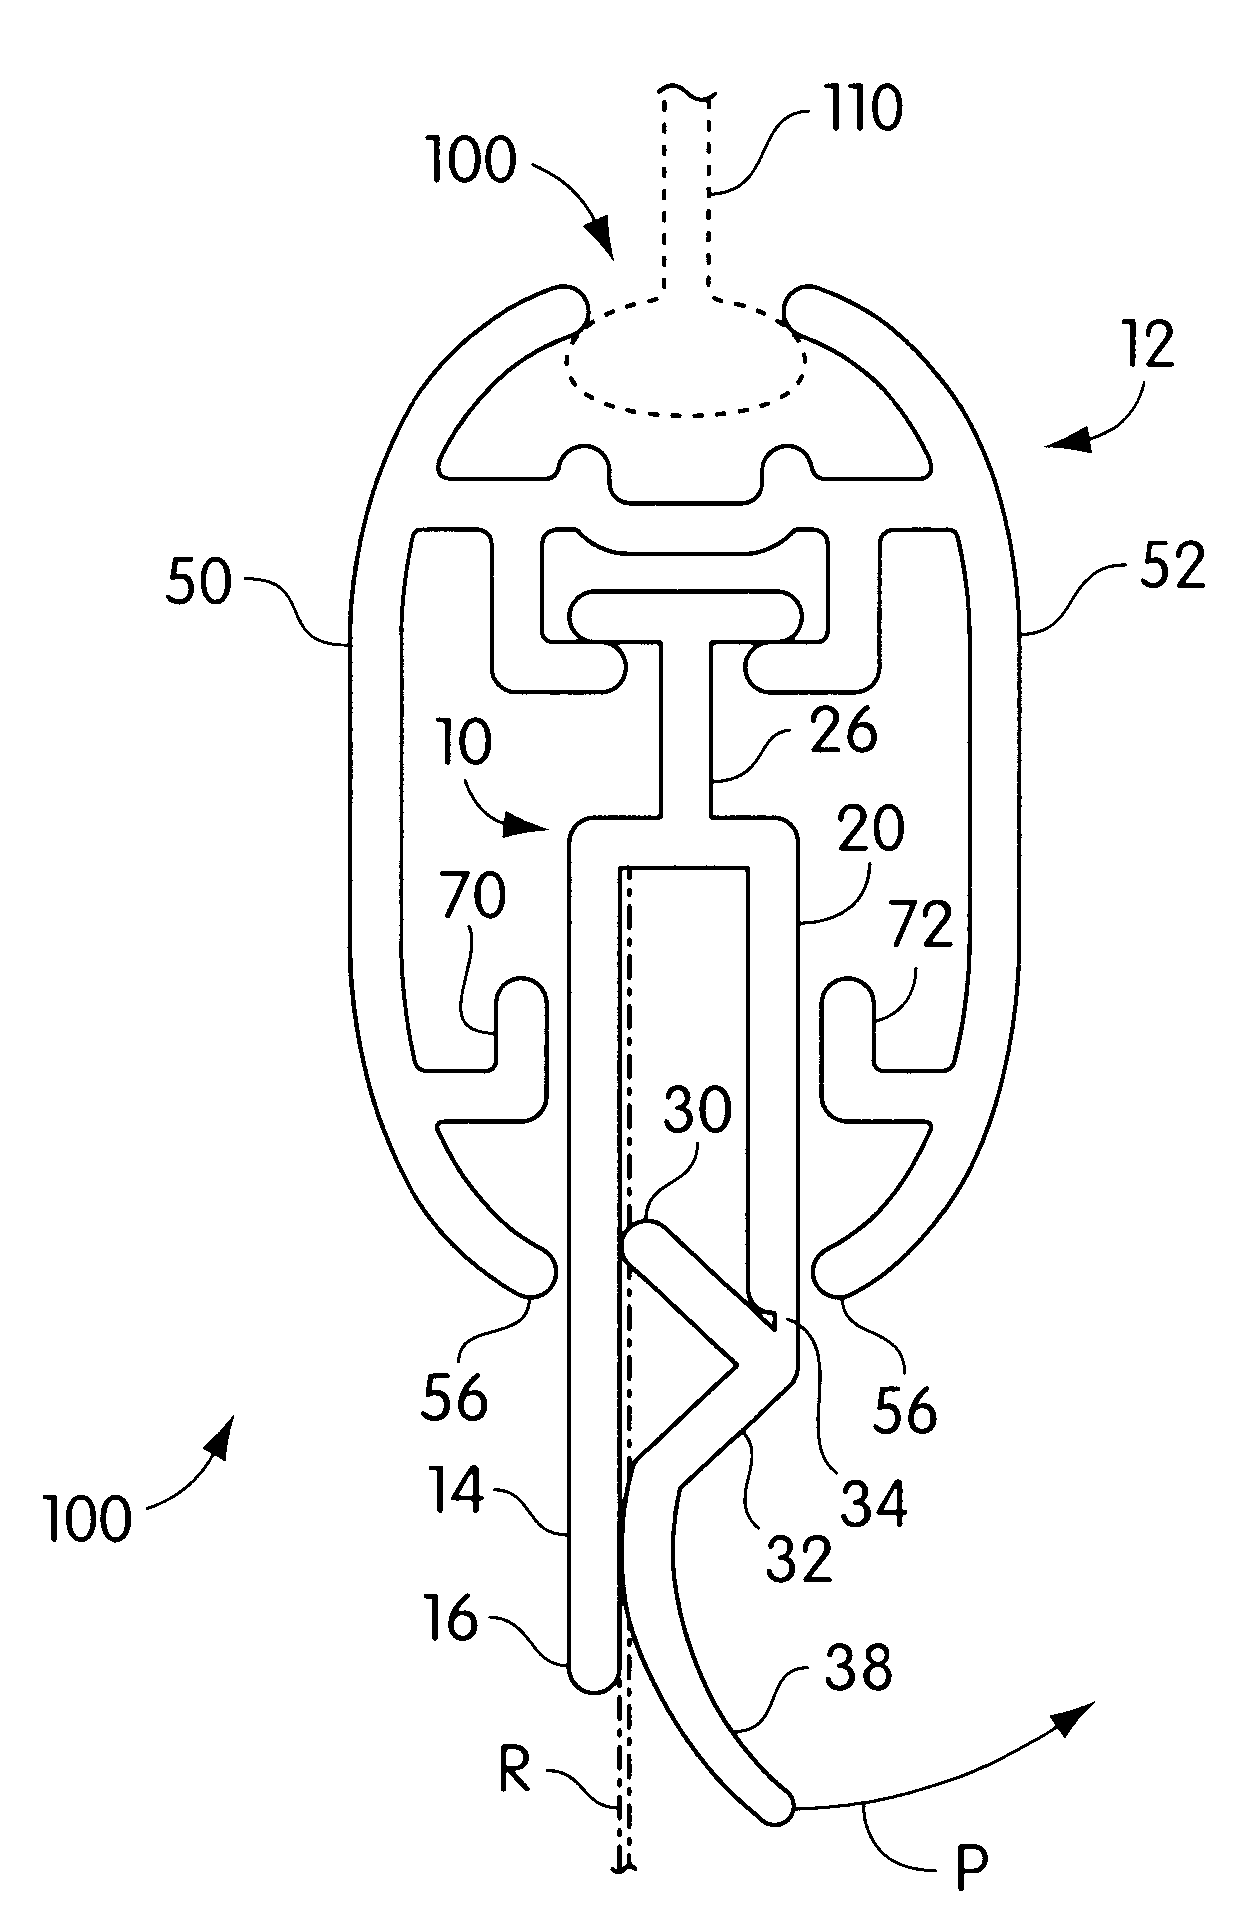 Elongated shell and internal gripper assembly